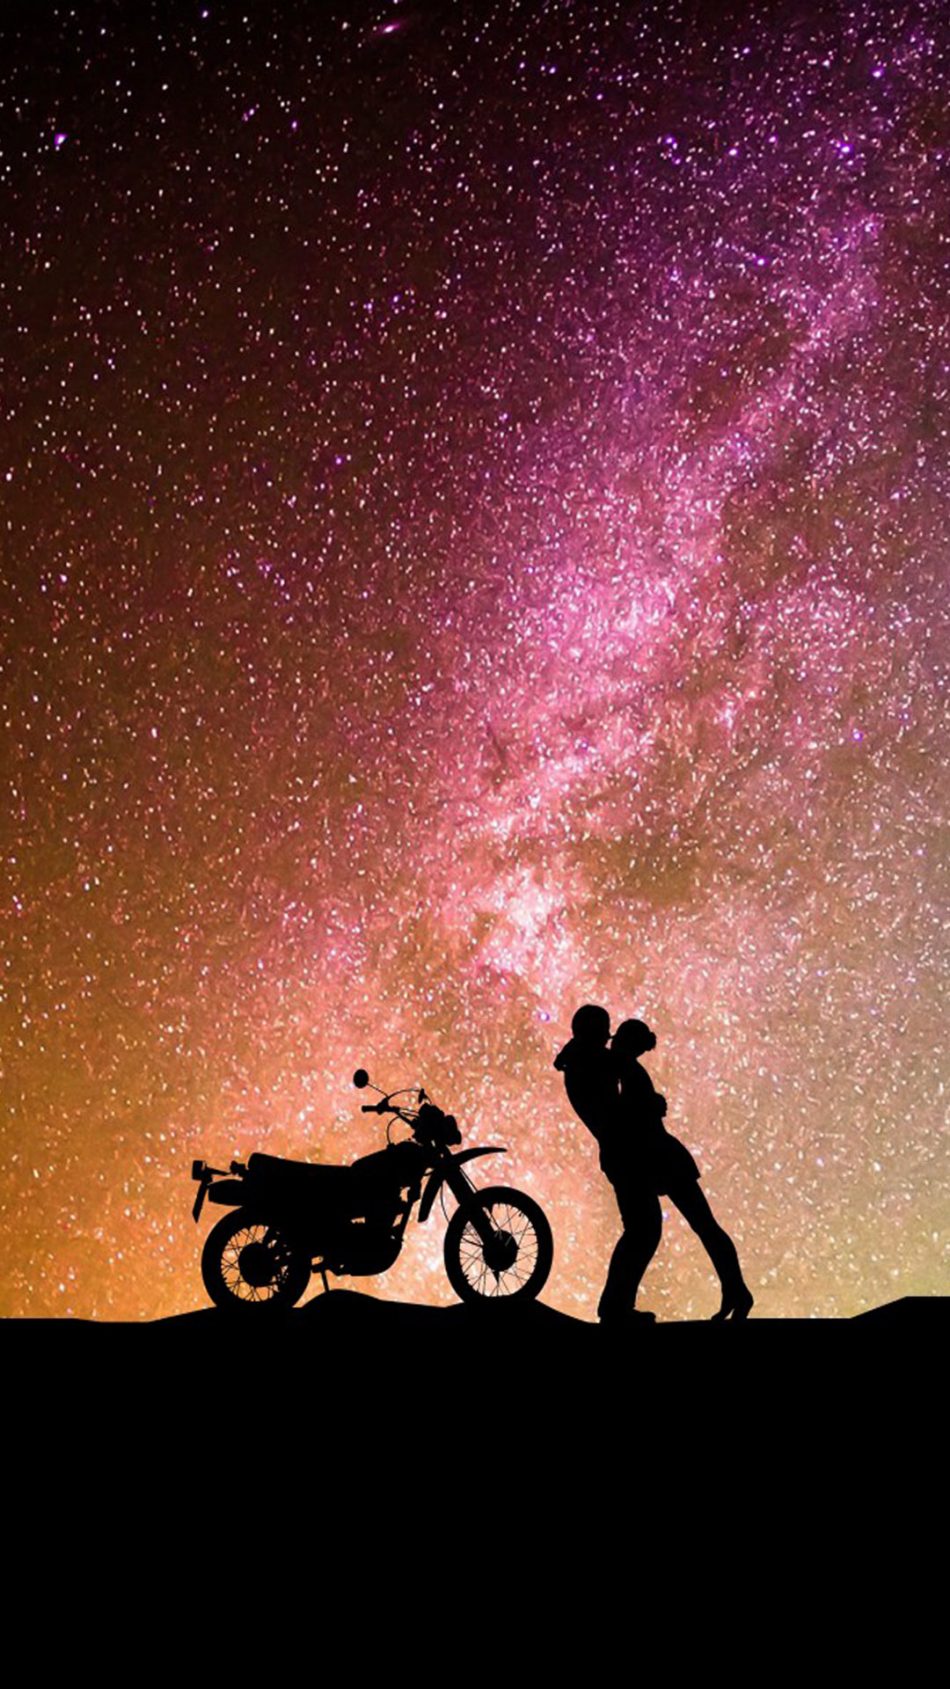 love kiss wallpapers for mobile,sky,silhouette,vehicle,illustration,landscape